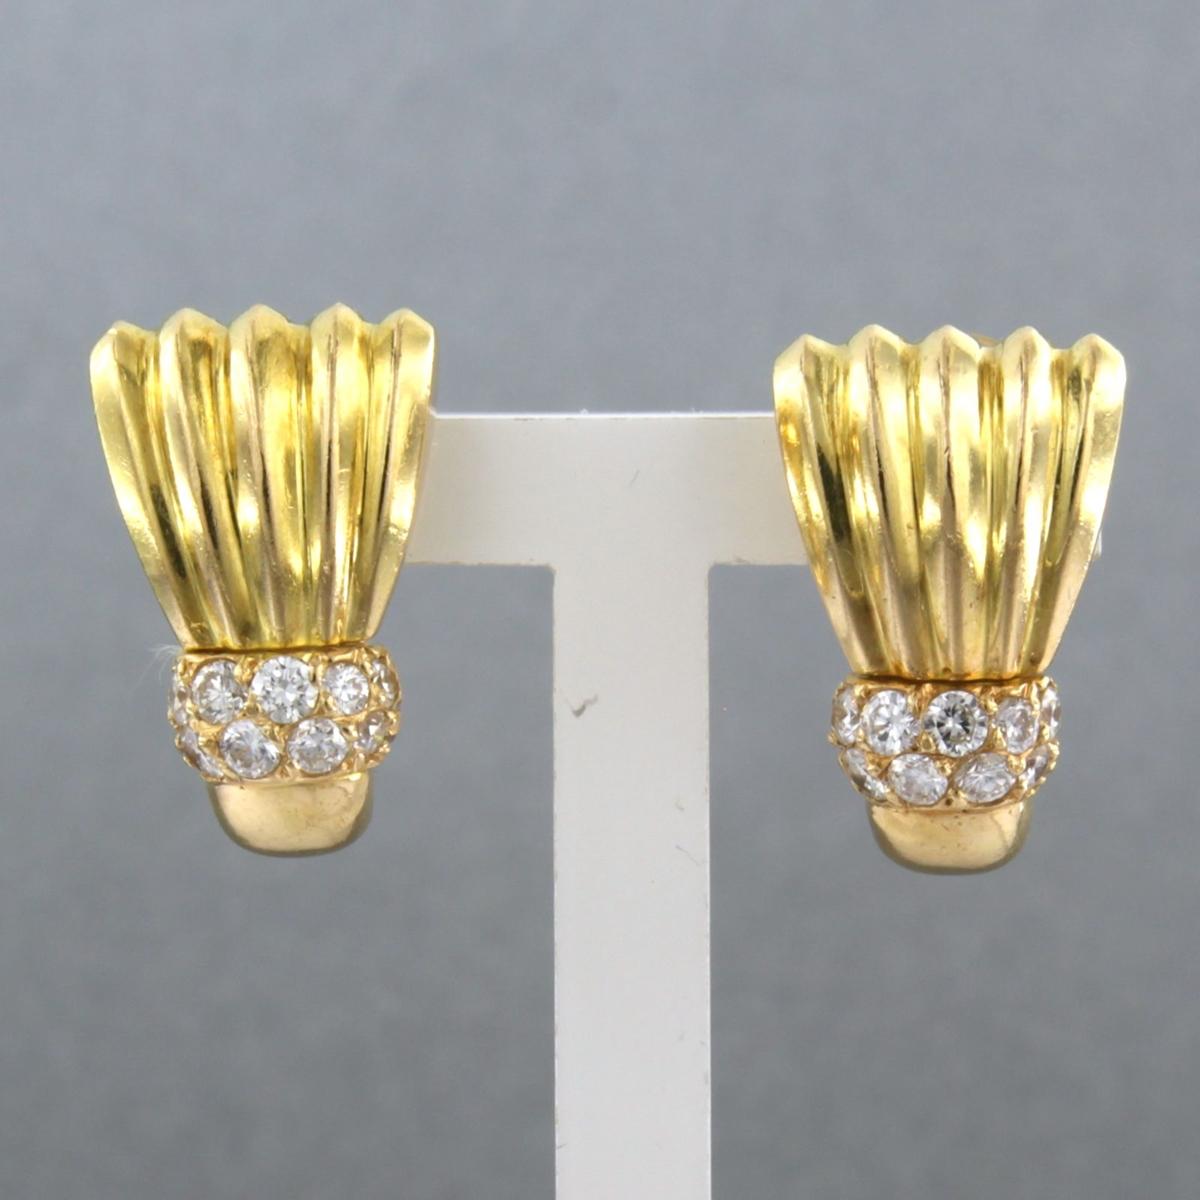 18k yellow gold ear clips set with brilliant cut diamonds. 0.50ct - F/G - VS/SI

detailed description:

The front of the ear clip is 1.8 cm by 1.1 cm wide

weight 13.1 grams

occupied with

- 18 x 1.8 mm brilliant cut diamonds, approximately 0.50